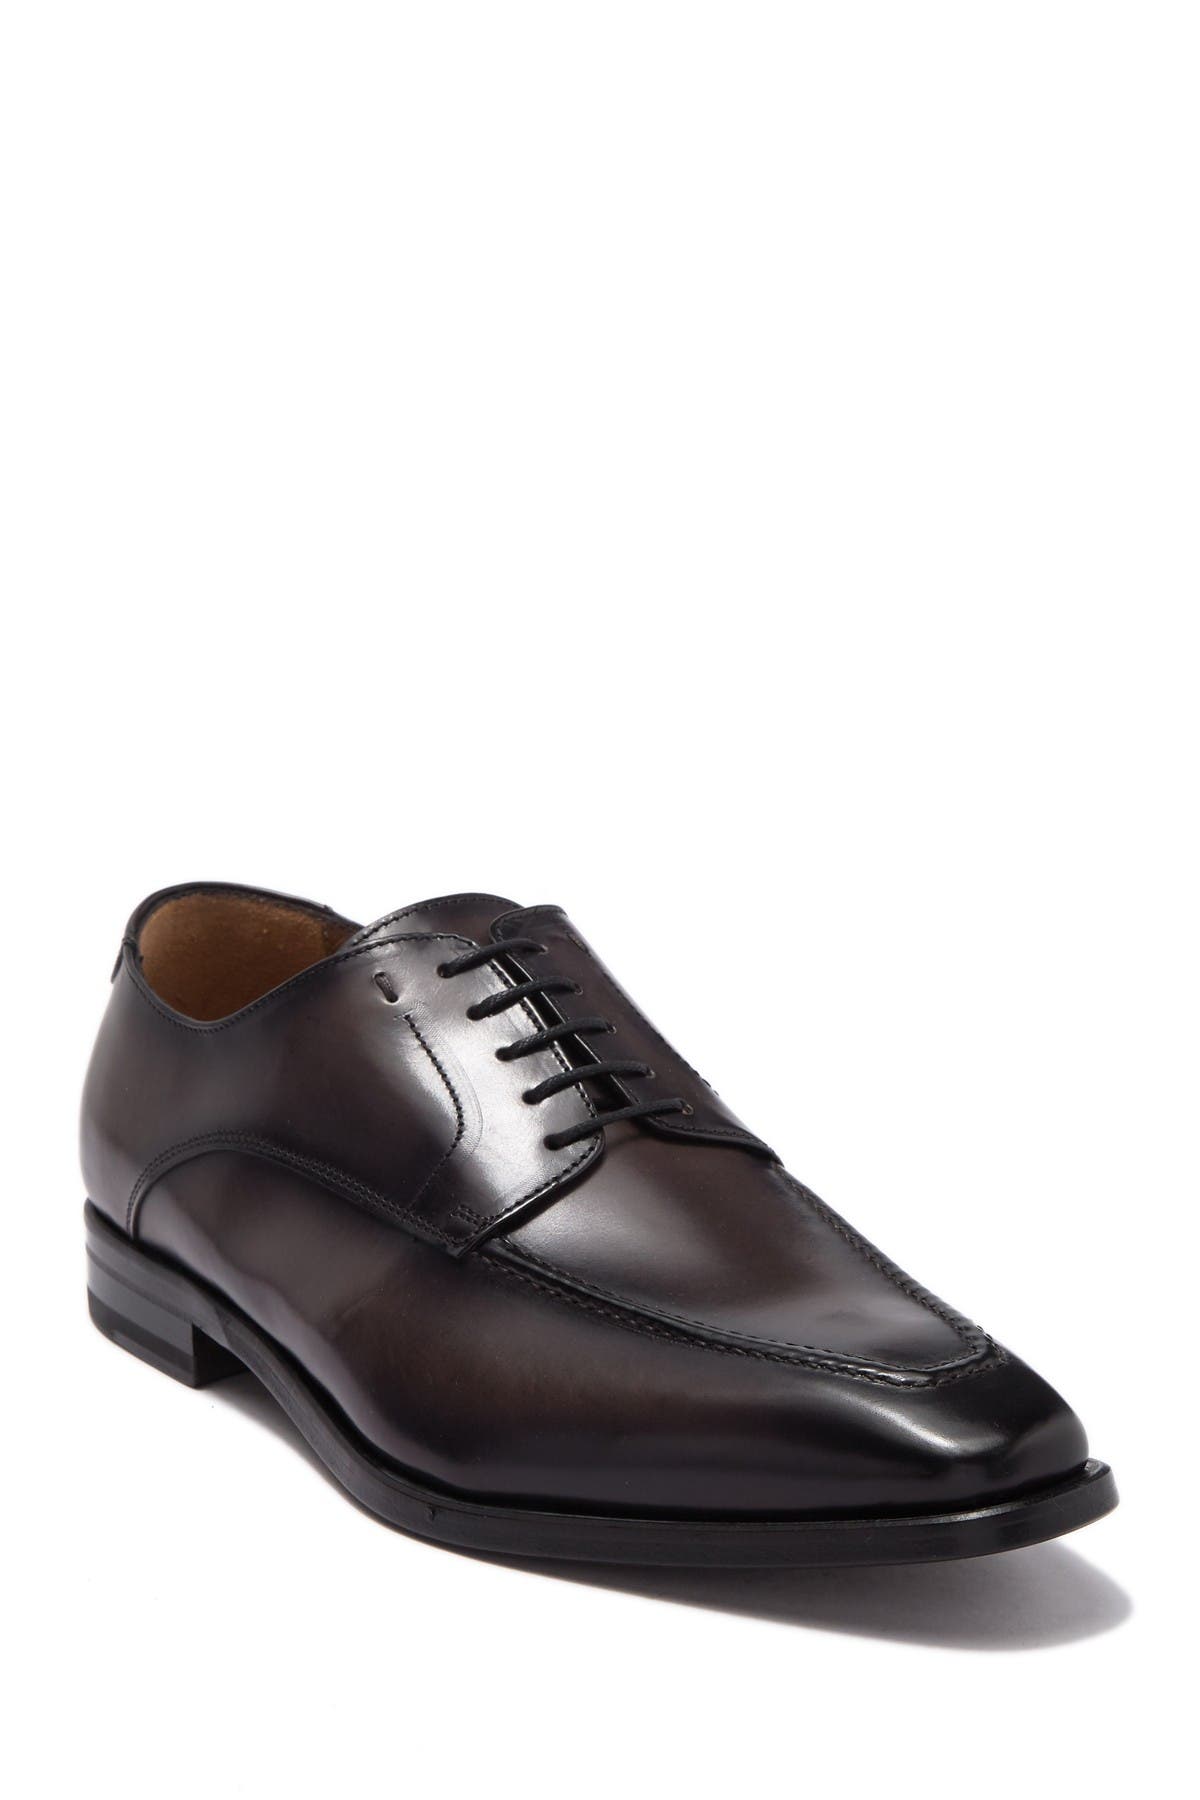 Bruno Magli | Colombo Leather Derby 